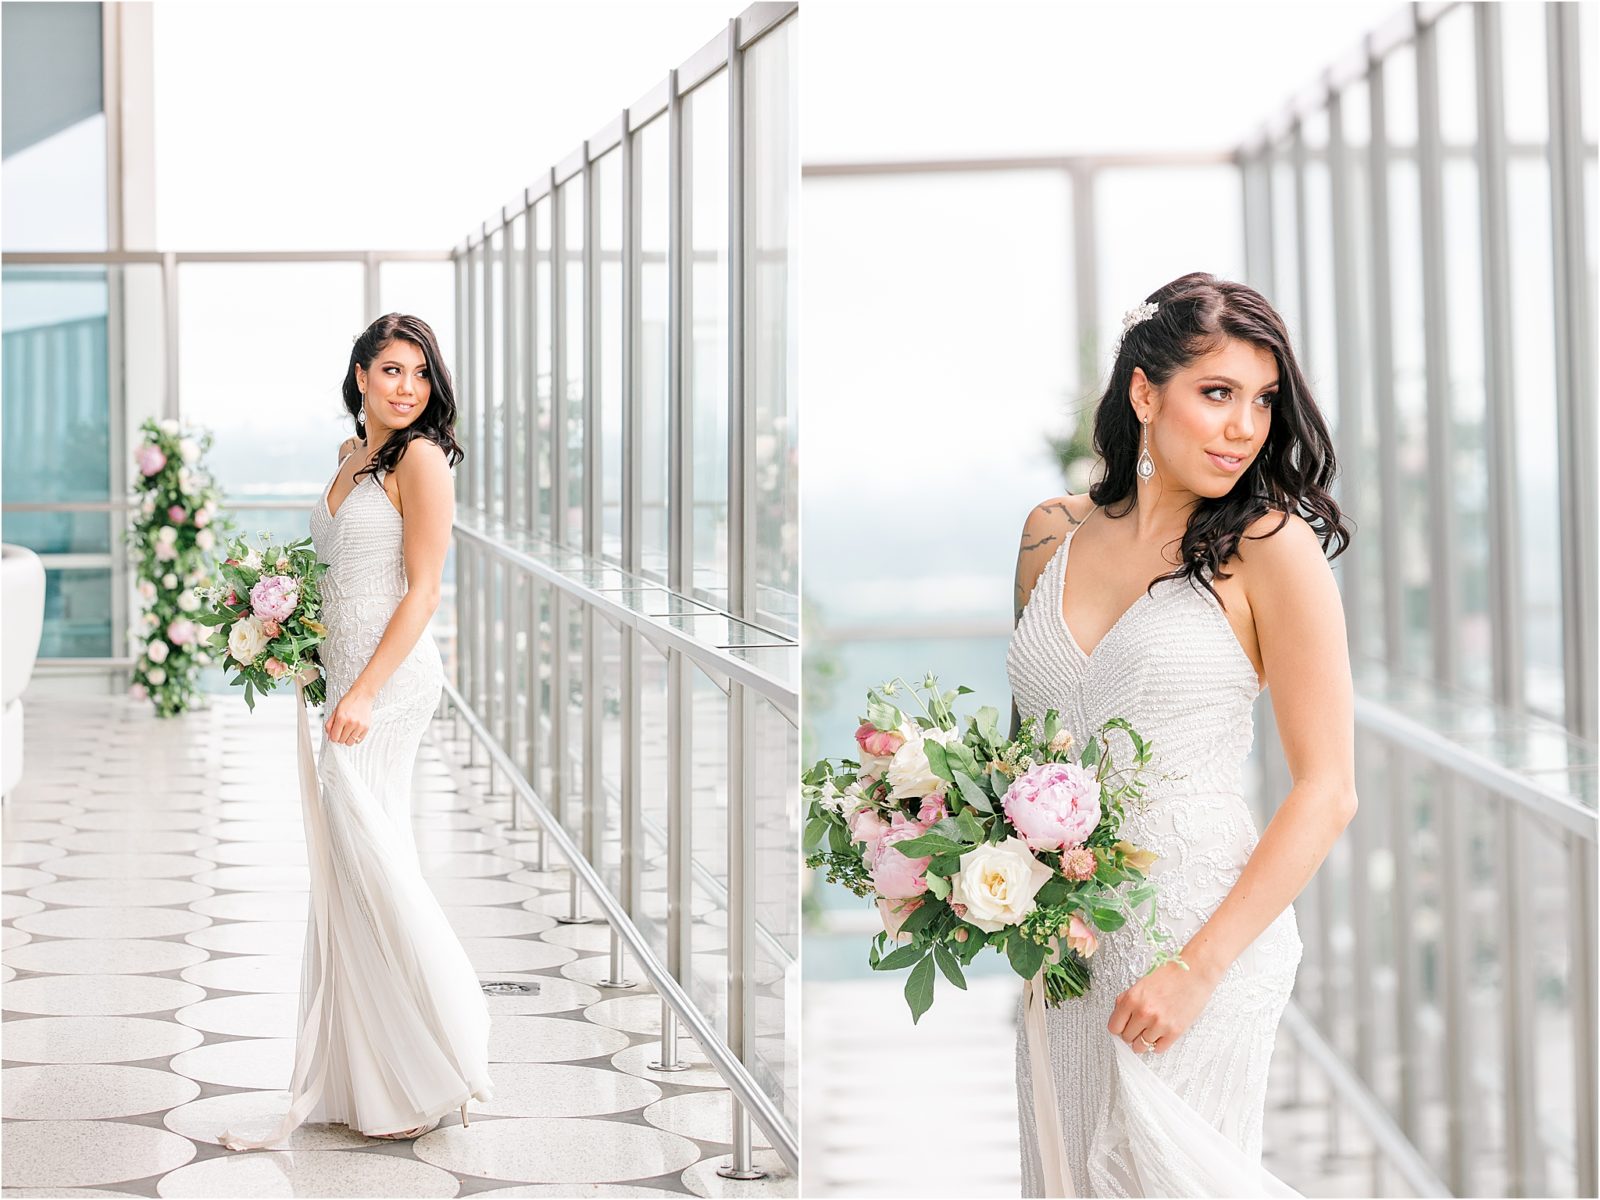 W Hotel Bridal Session with soft spring bouquet by Wedding Stone Events and Photography by Jillian Hogan Photography 